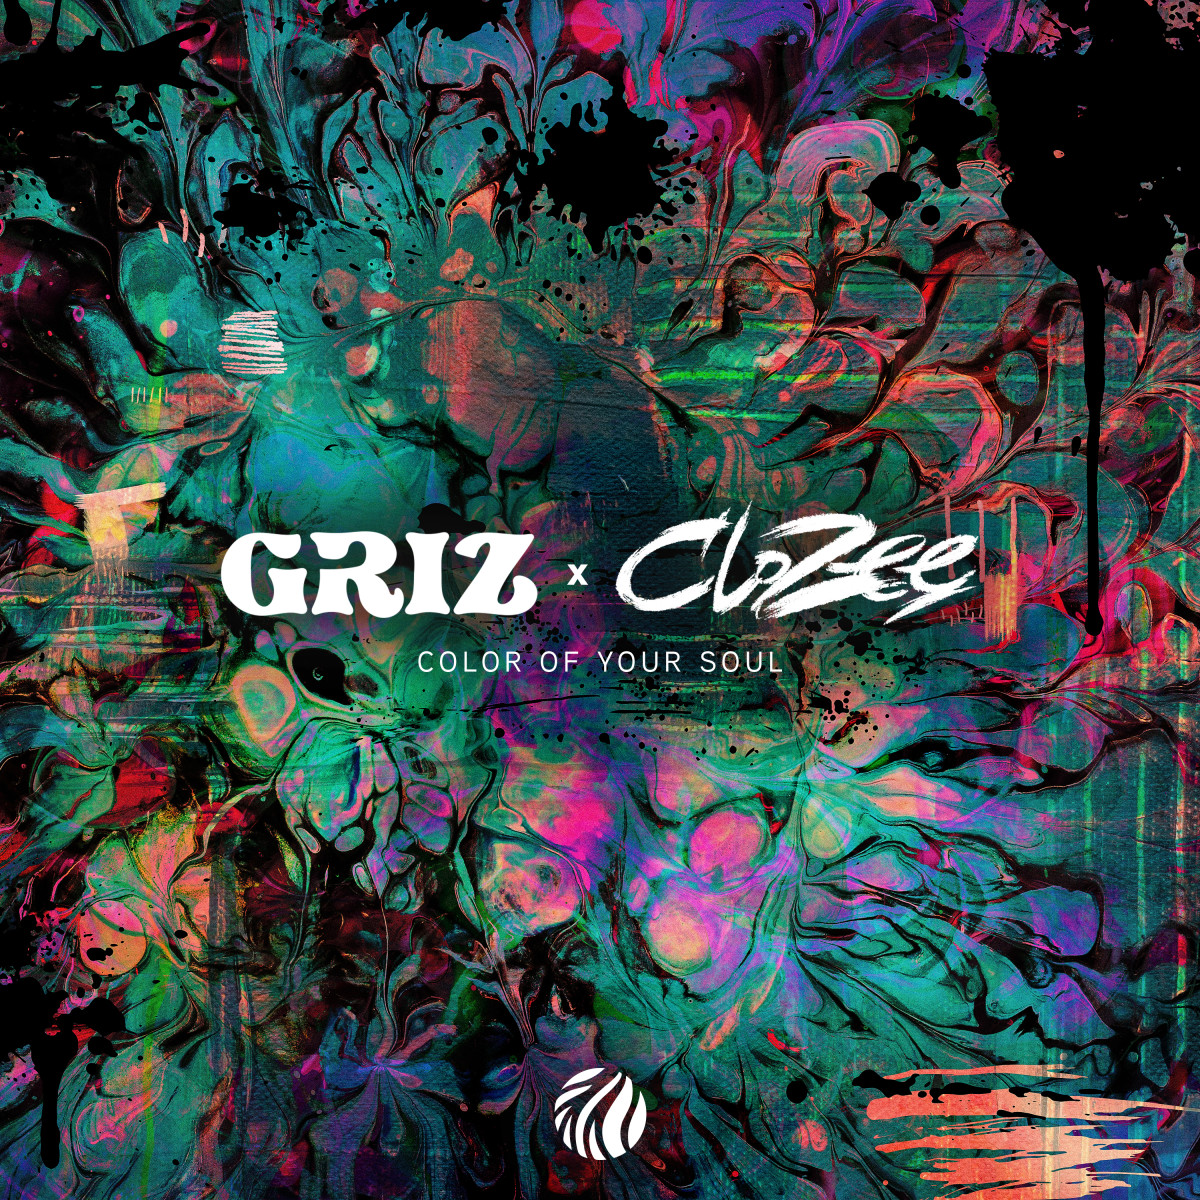 Artwork for GRiZ and Clozee's "Color Of Your Soul."